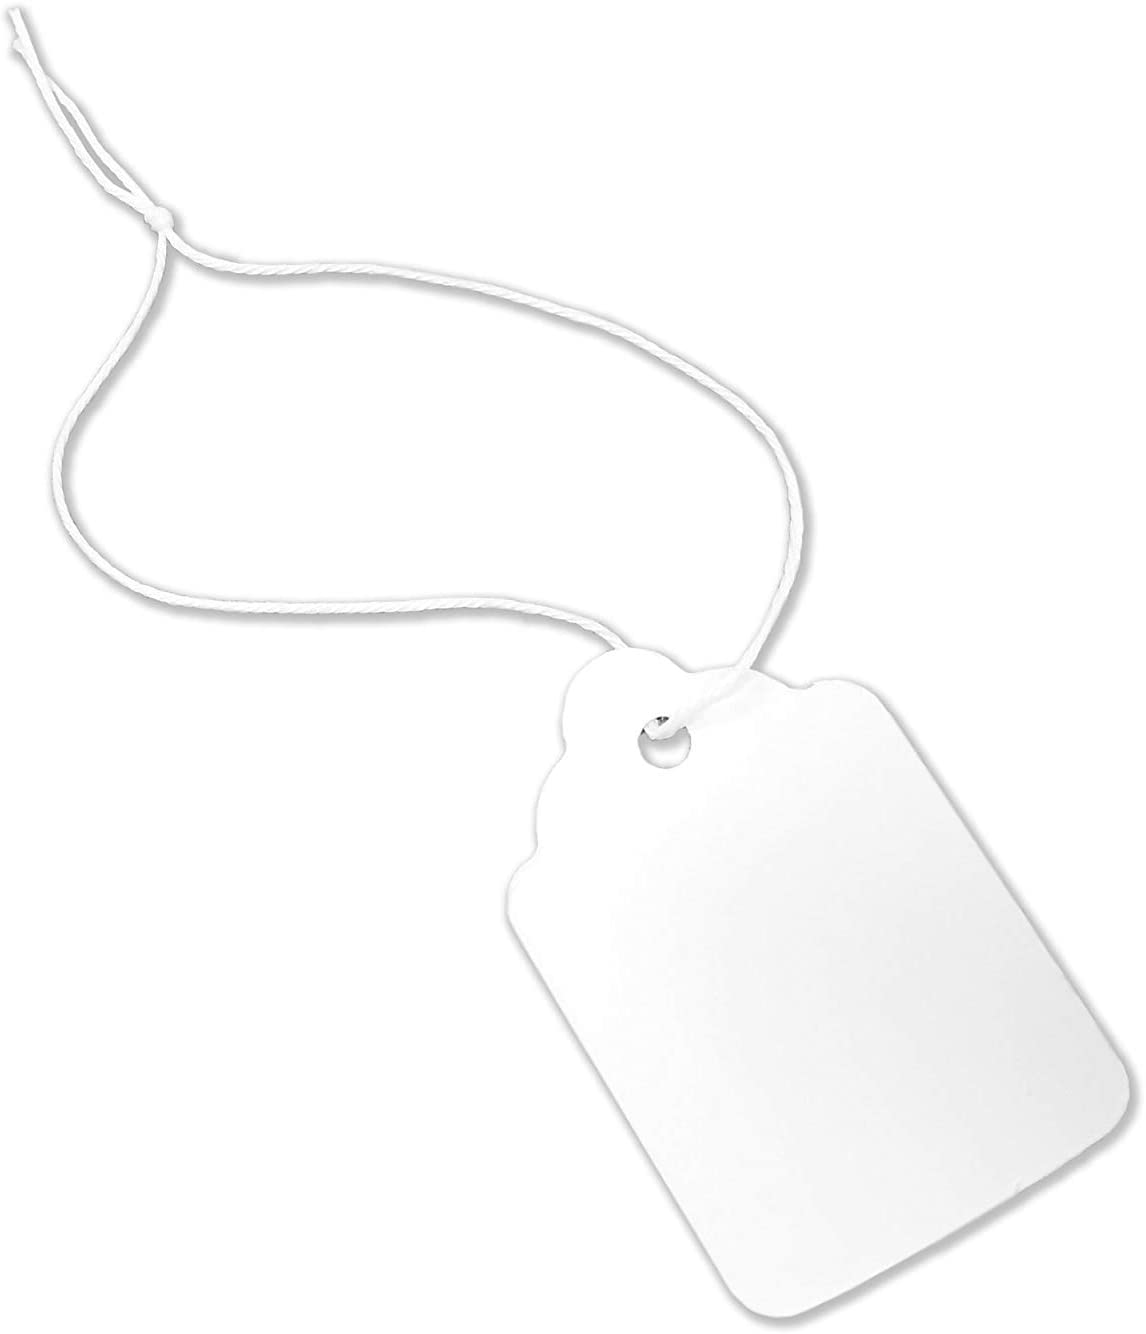 Blank Strung Merchandise Pricing Tags, 1.3 W x 1.9 H Size # 6 Tags with  String, White, 100 Pack 